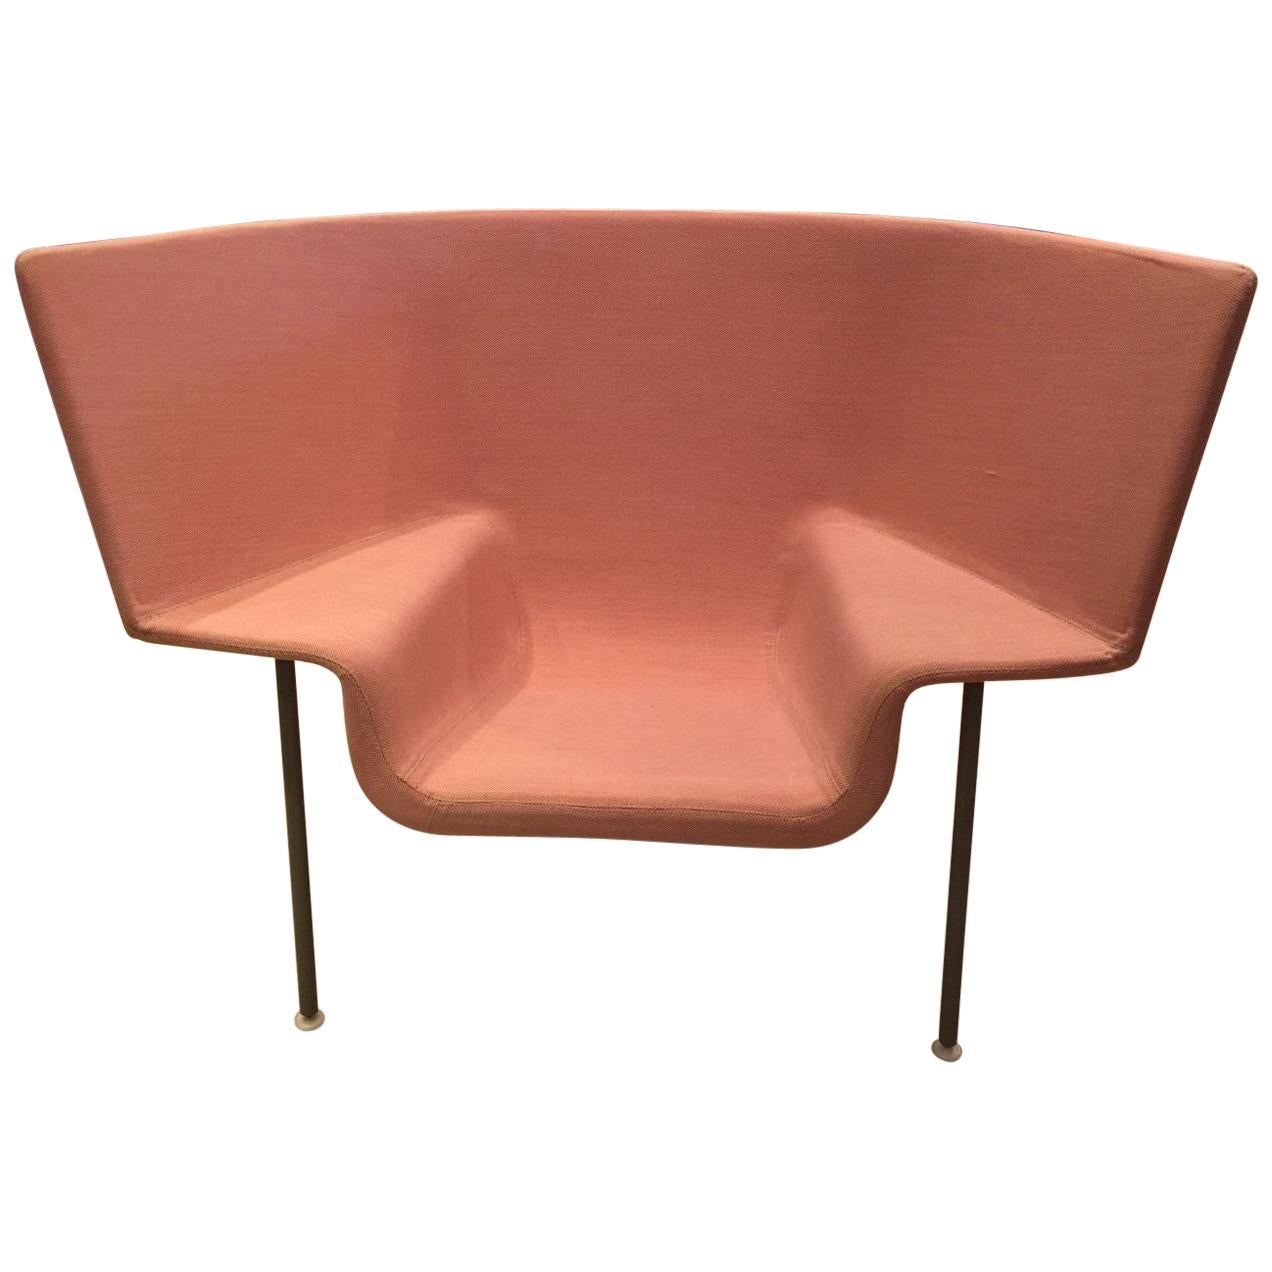 Doshi and Levien Cappellini "Capo" Lounge Chair For Sale